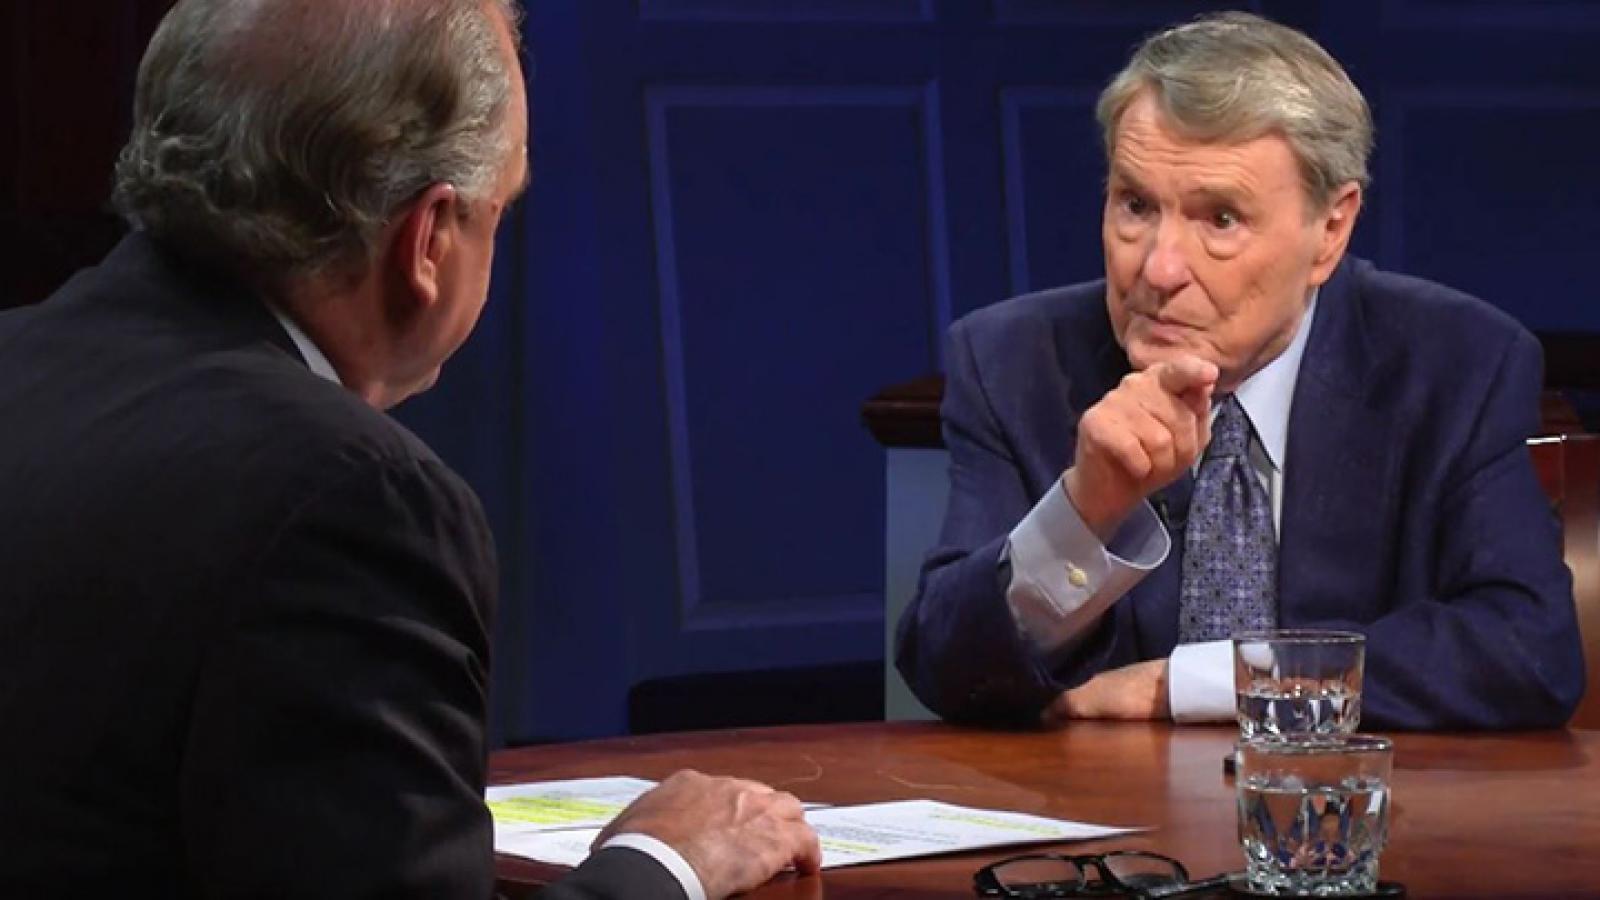 Jim Lehrer offers advice to the next president